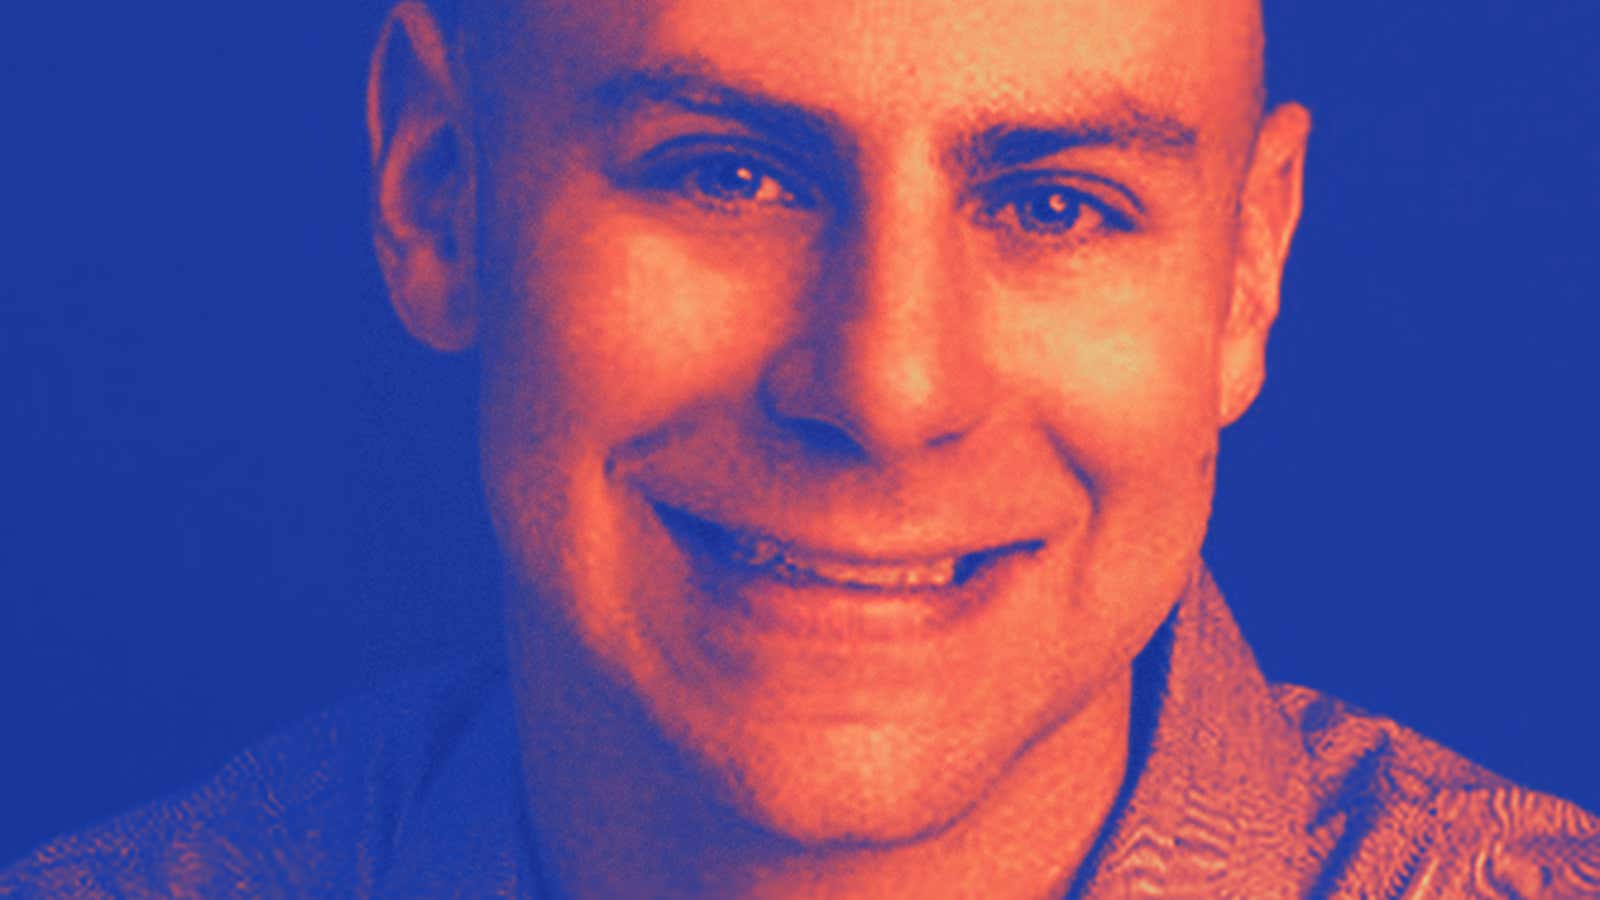 Adam Grant on the place he thinks we’ll go a lot less because of Covid